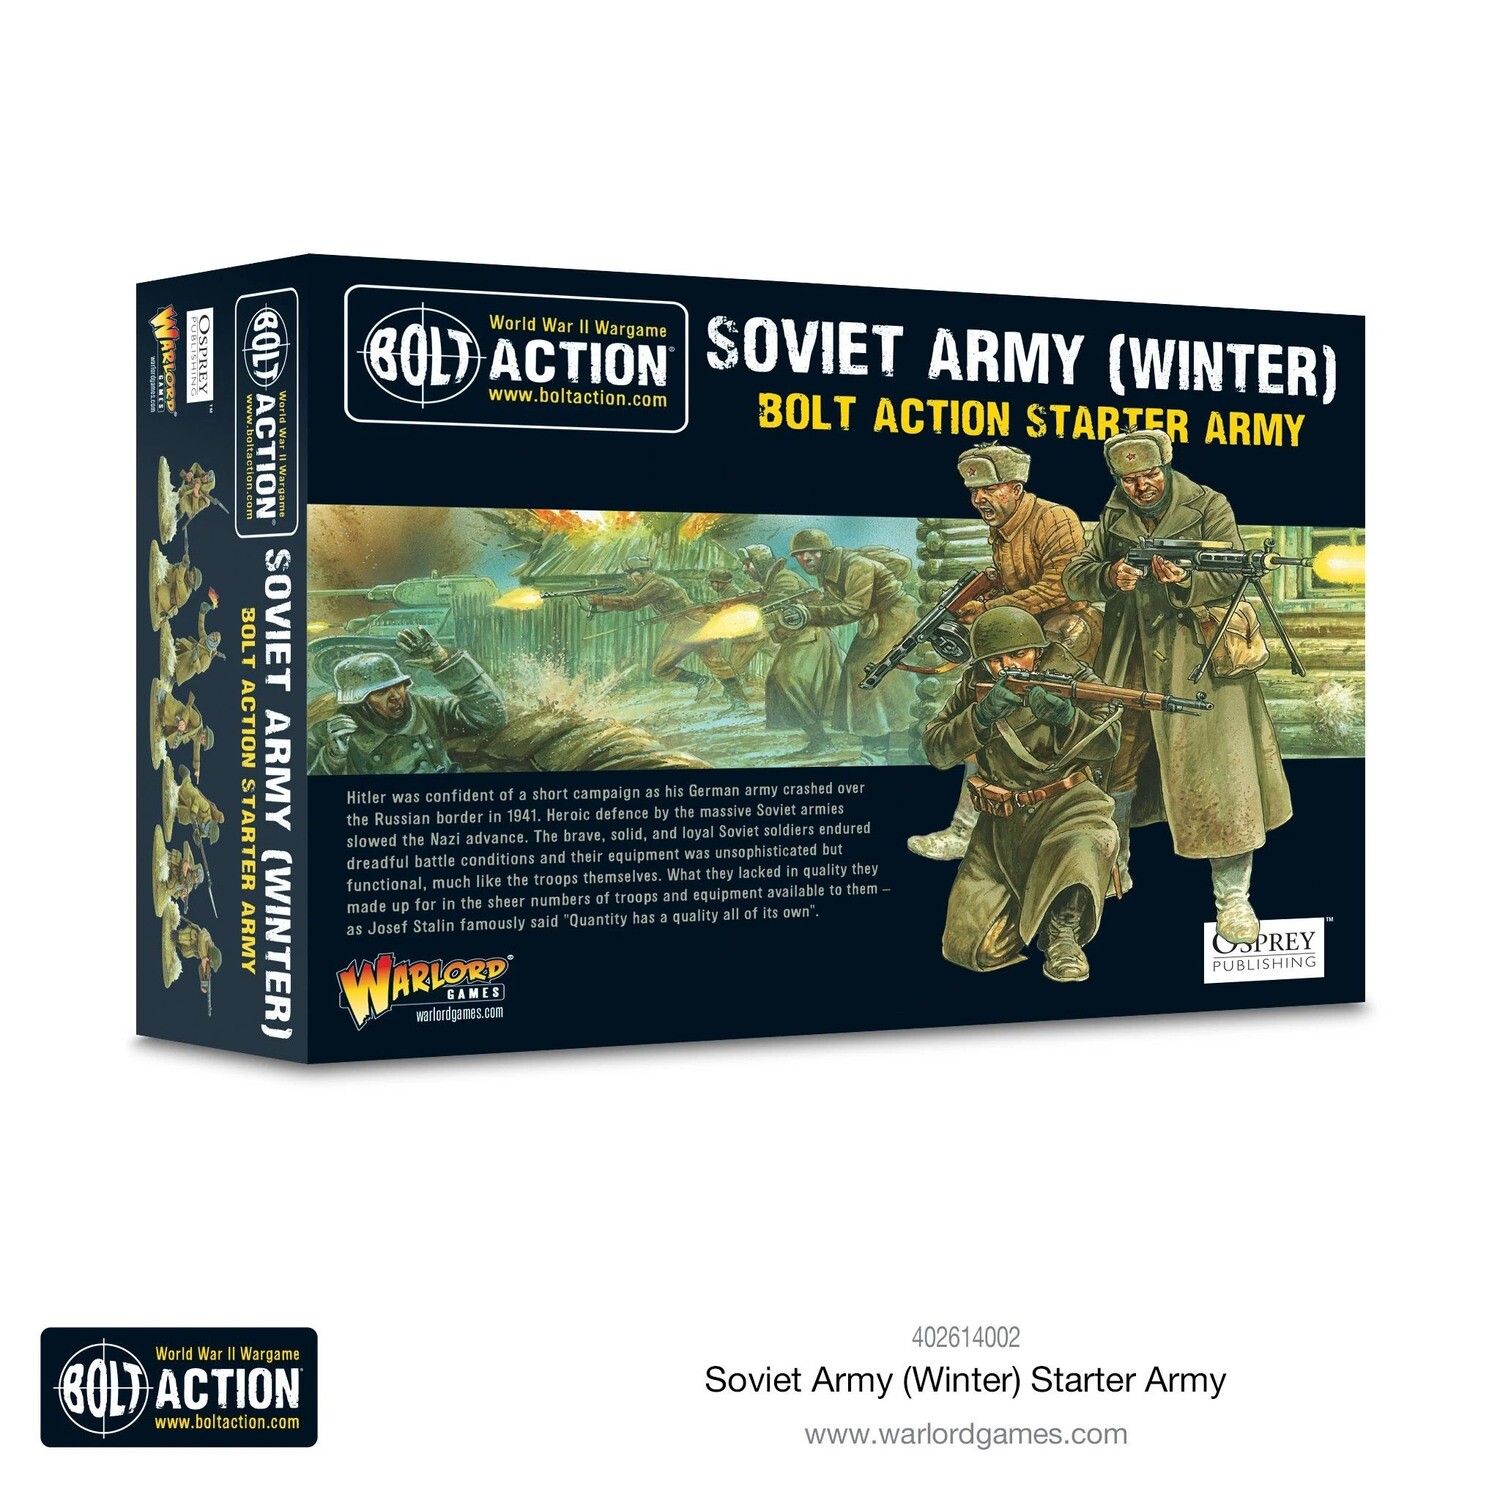 Soviet Army (Winter) starter army - Bolt Action Starter Army - Soviet - Warlord Games